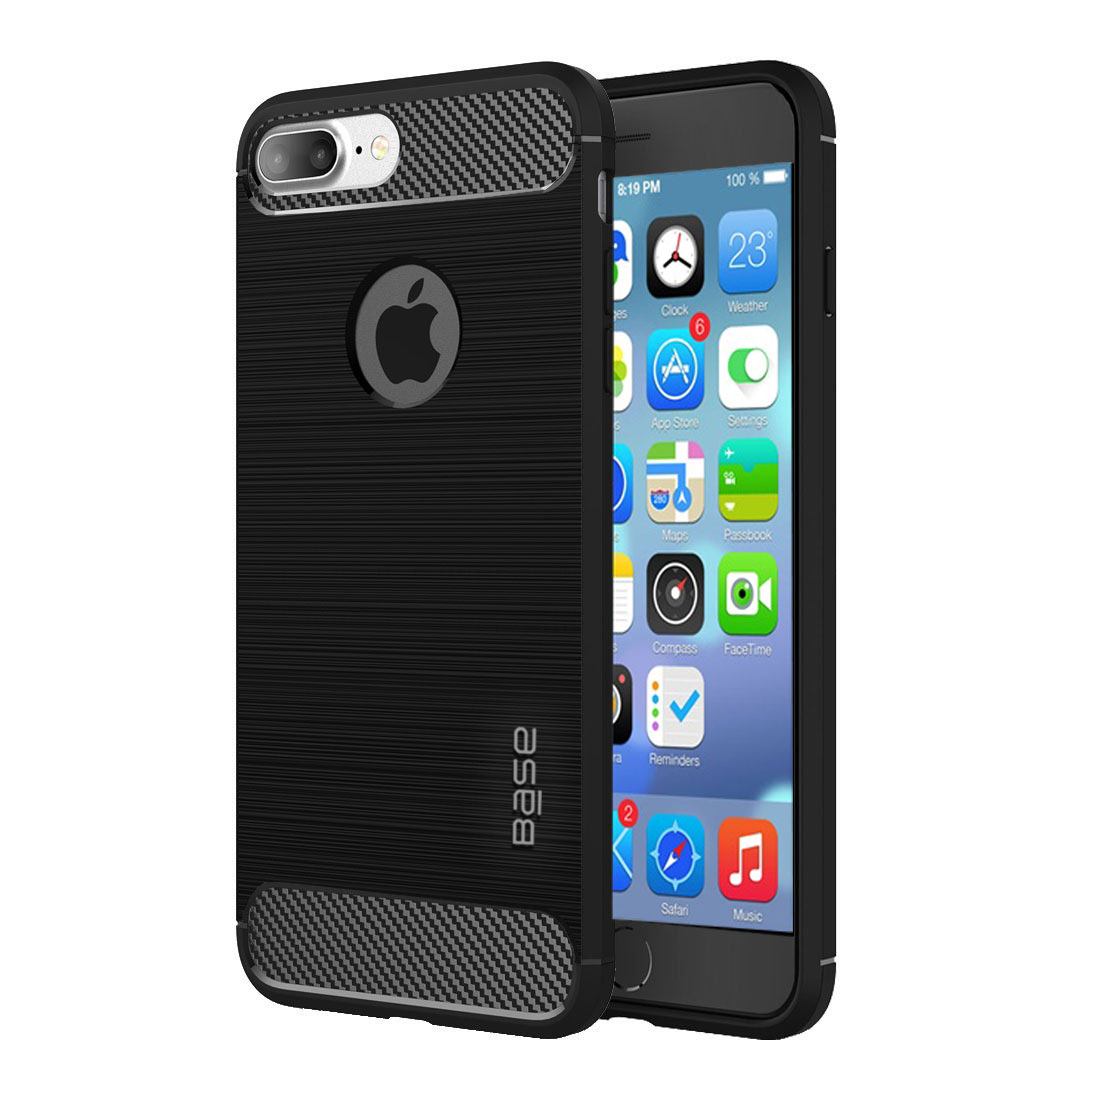 Black sleek brushed-metallic finish Protective Case with carbon-fiber accents for iPhone 7/8 Plus cell phones